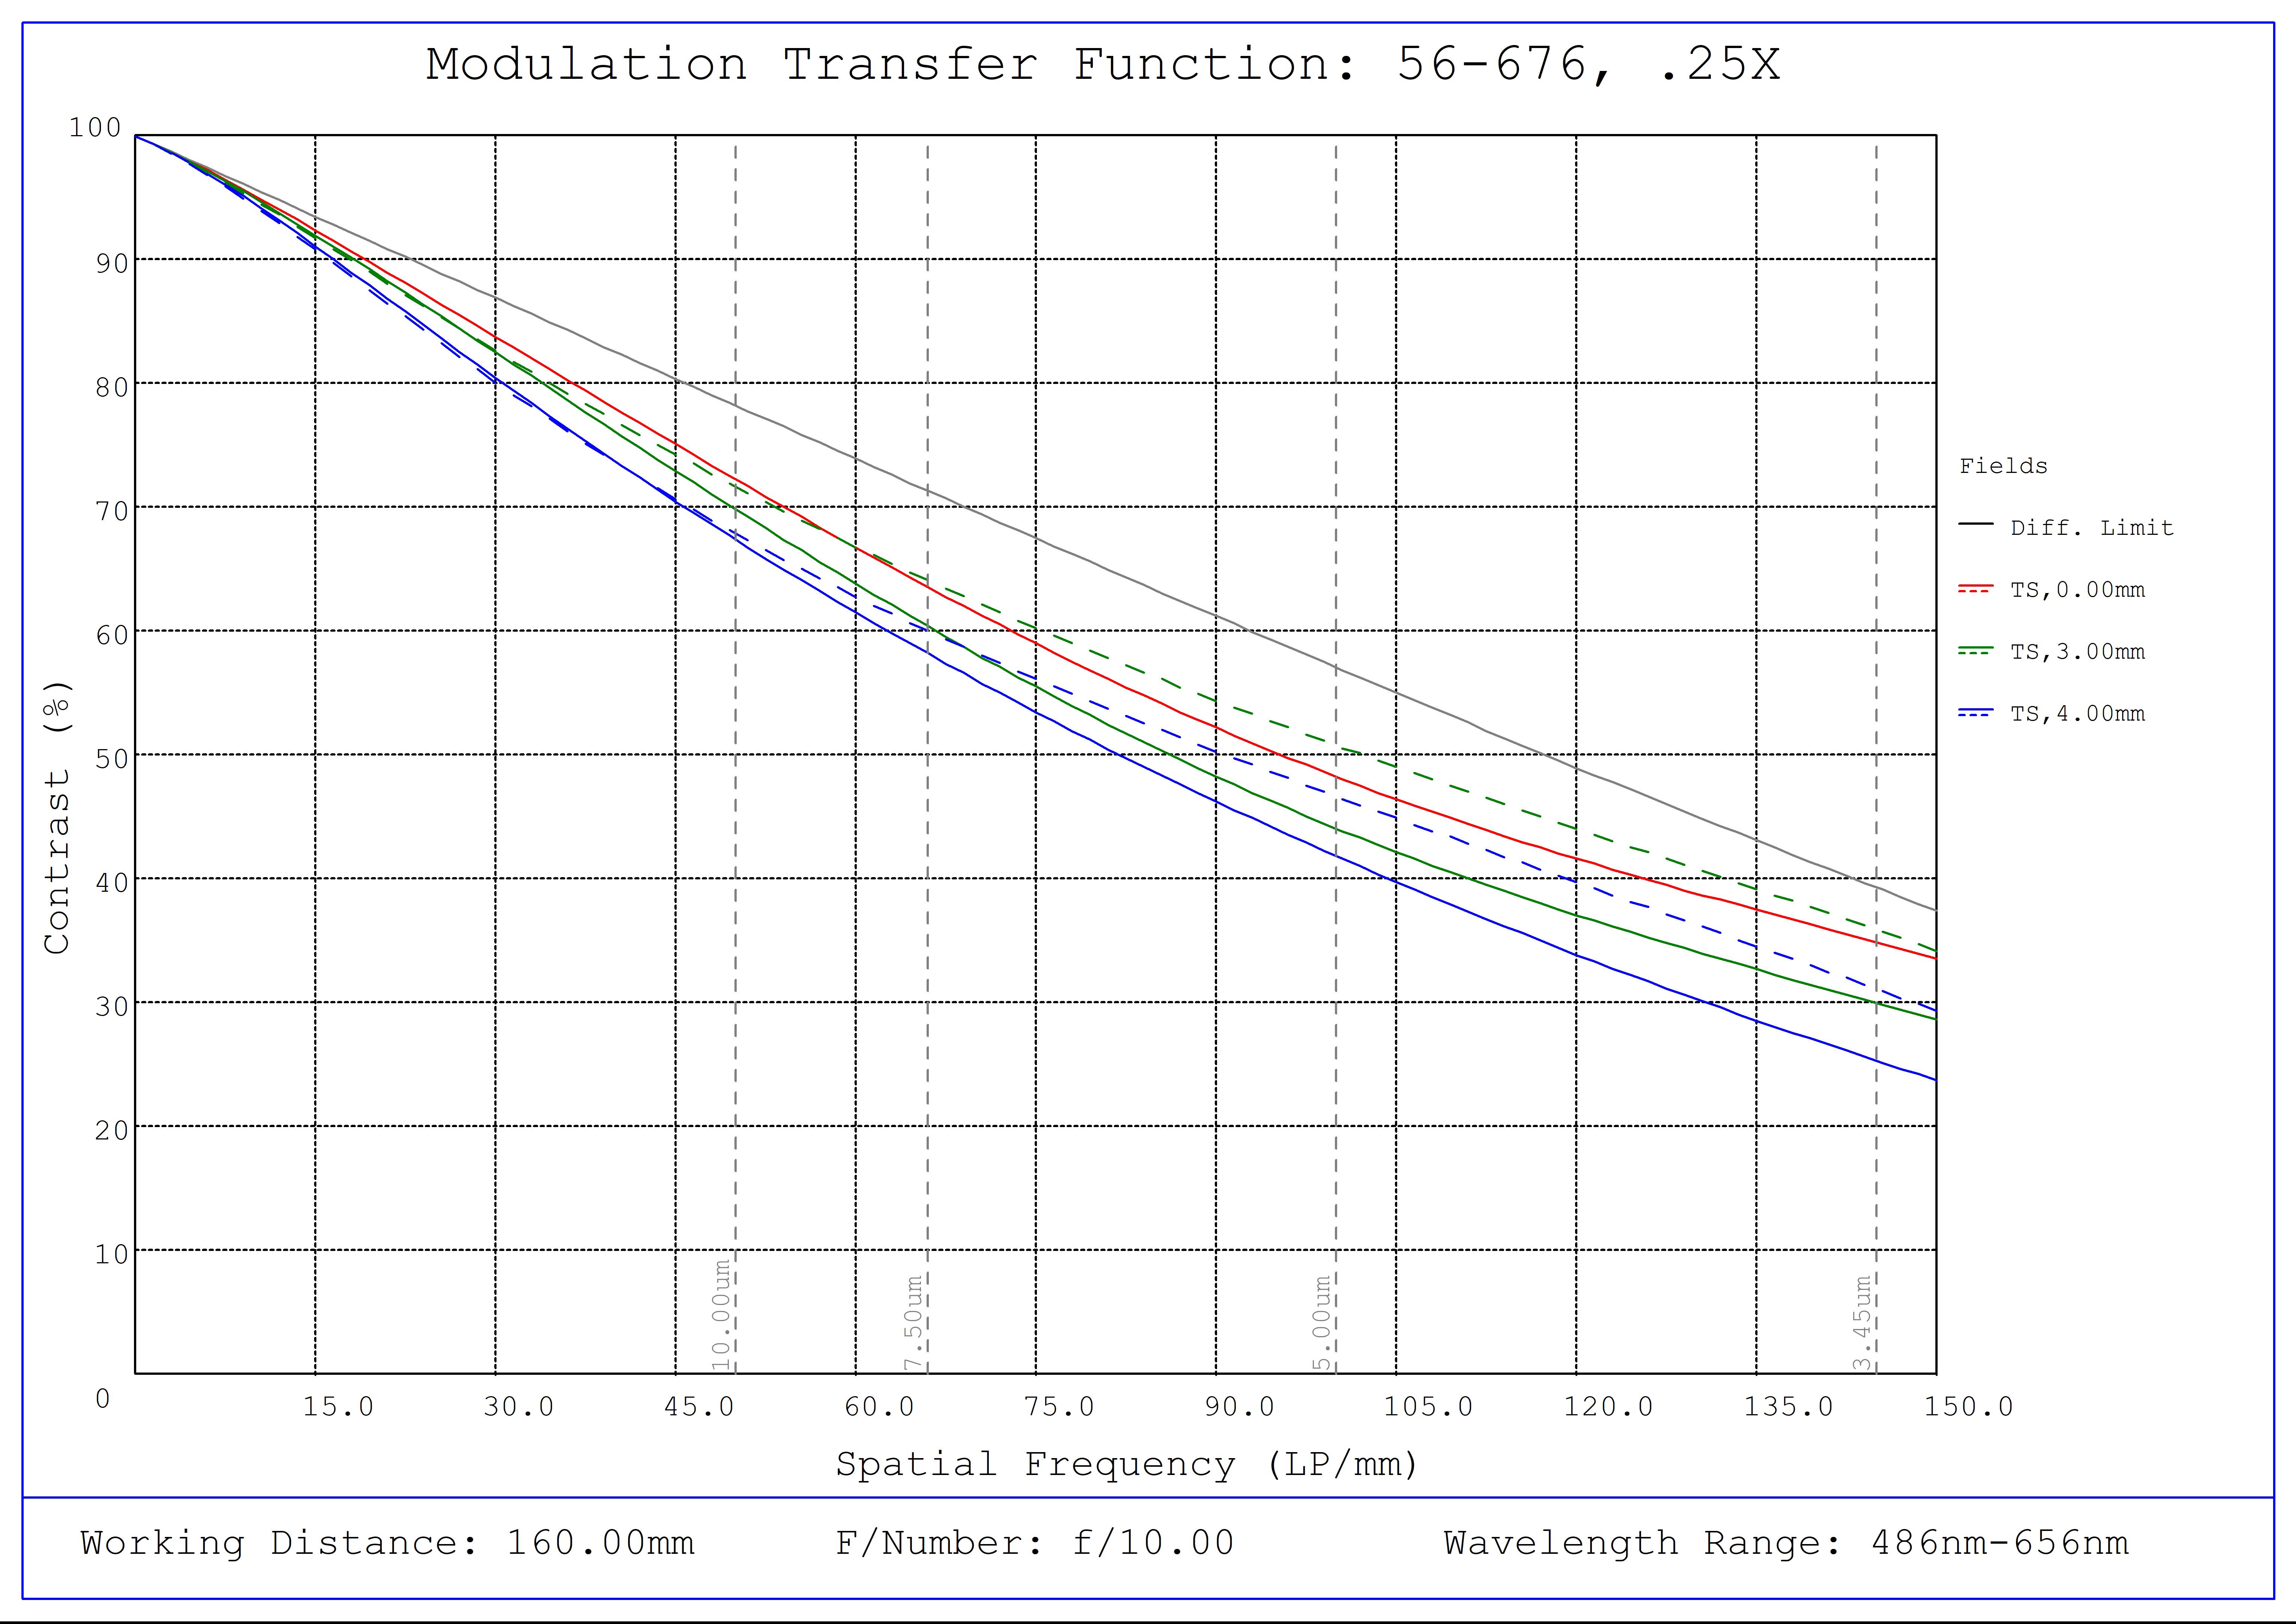 #56-676, 0.25X SilverTL™ Telecentric Lens, Modulated Transfer Function (MTF) Plot, 160mm Working Distance, f10